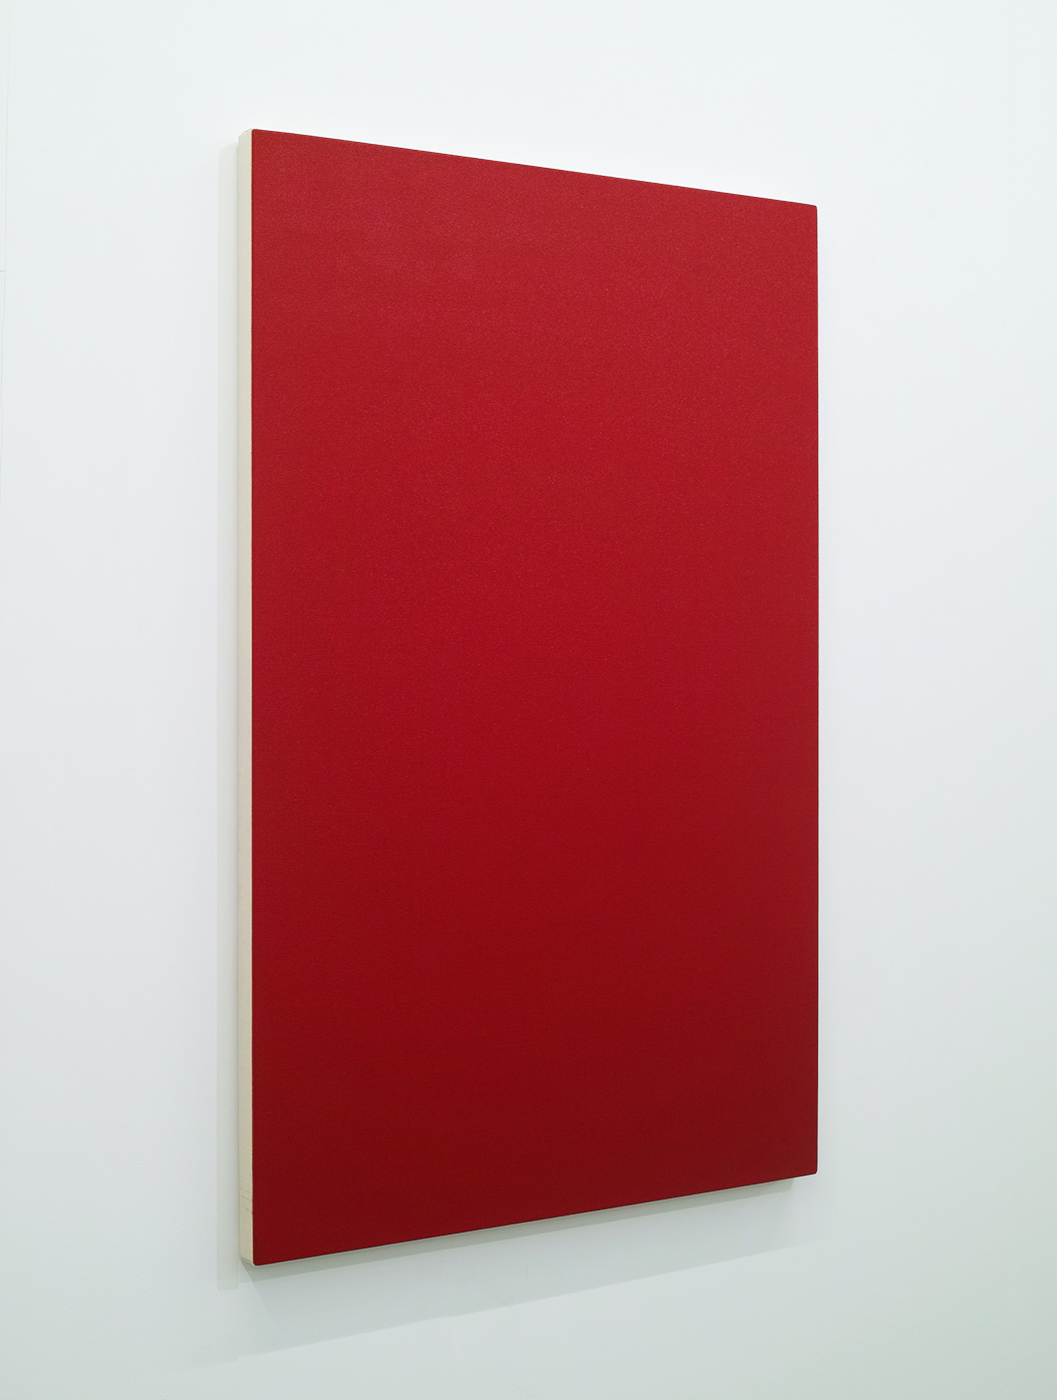 Text No. 582 (untitled red)<br>acrylic, ink on canvas,  1310 x 805 x 45 mm,  2006